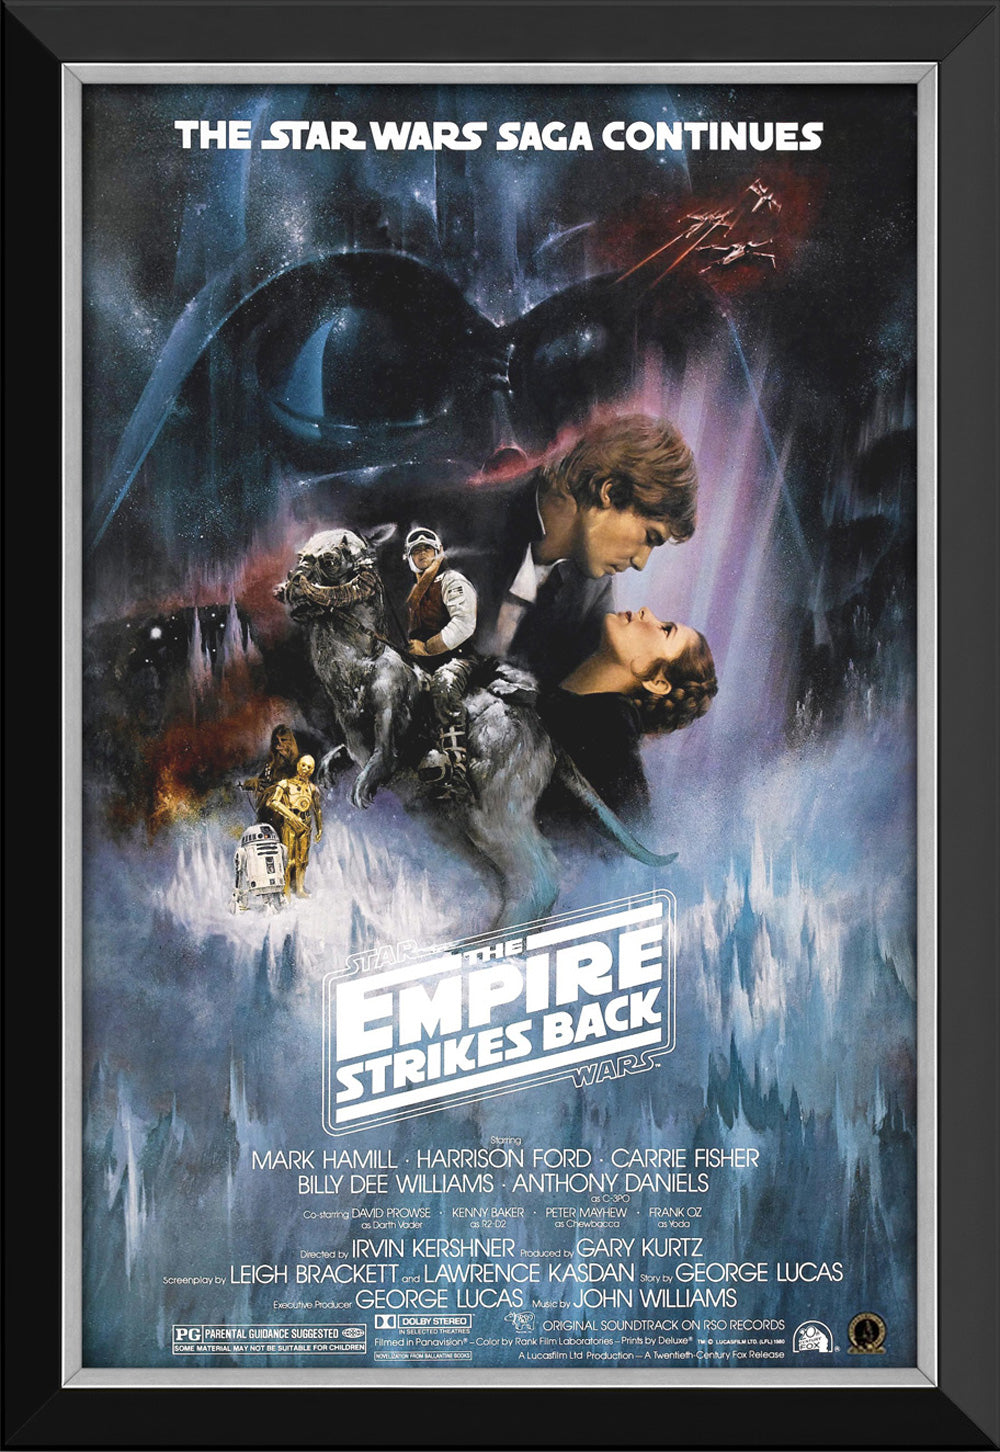 Star Wars Ep V The Empire Strikes Back - Movie Poster Framed Canvas, Star Wars, Pop Culture Art, Movies, Collectibile Memorabilia, AAAPM32531